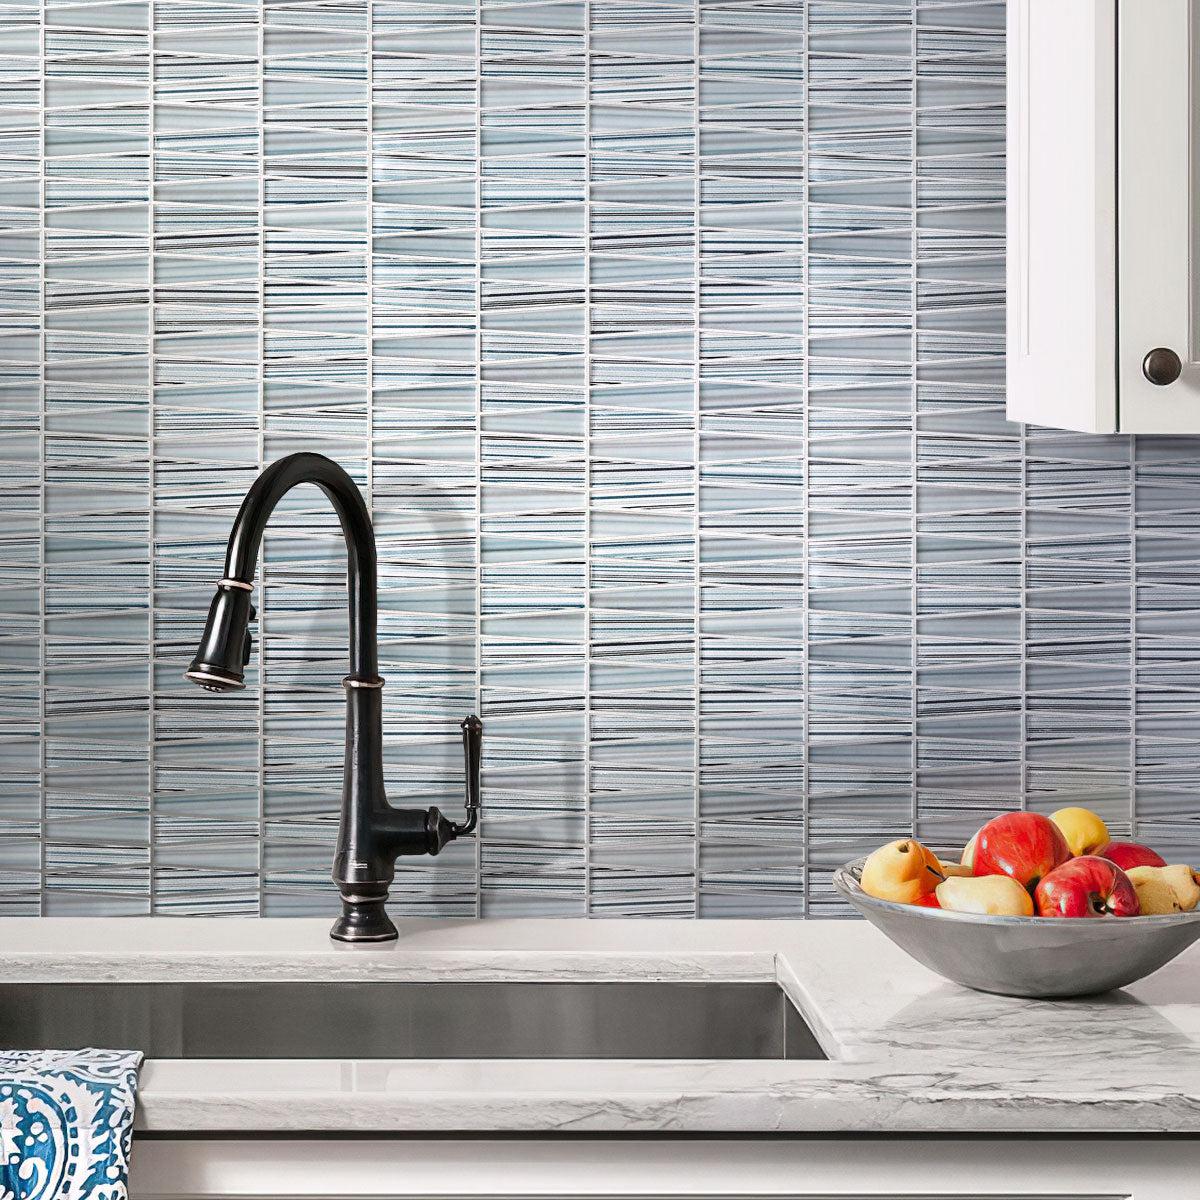 Fabrique Blue Grey Triangle Glass Mosaic Kitchen Wall Tile